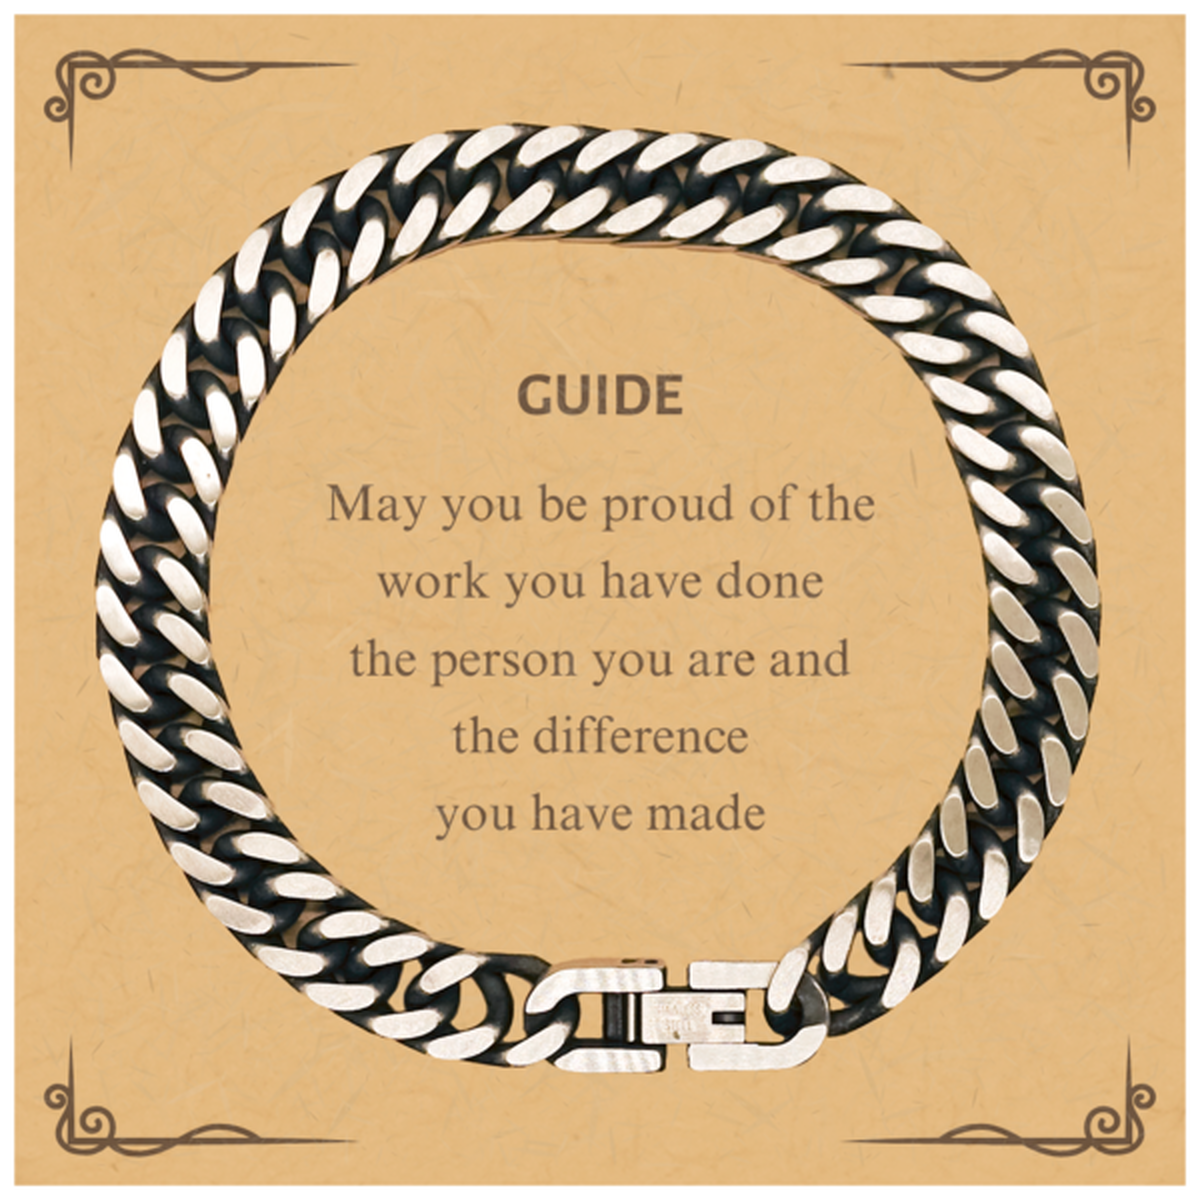 Guide May you be proud of the work you have done, Retirement Guide Cuban Link Chain Bracelet for Colleague Appreciation Gifts Amazing for Guide